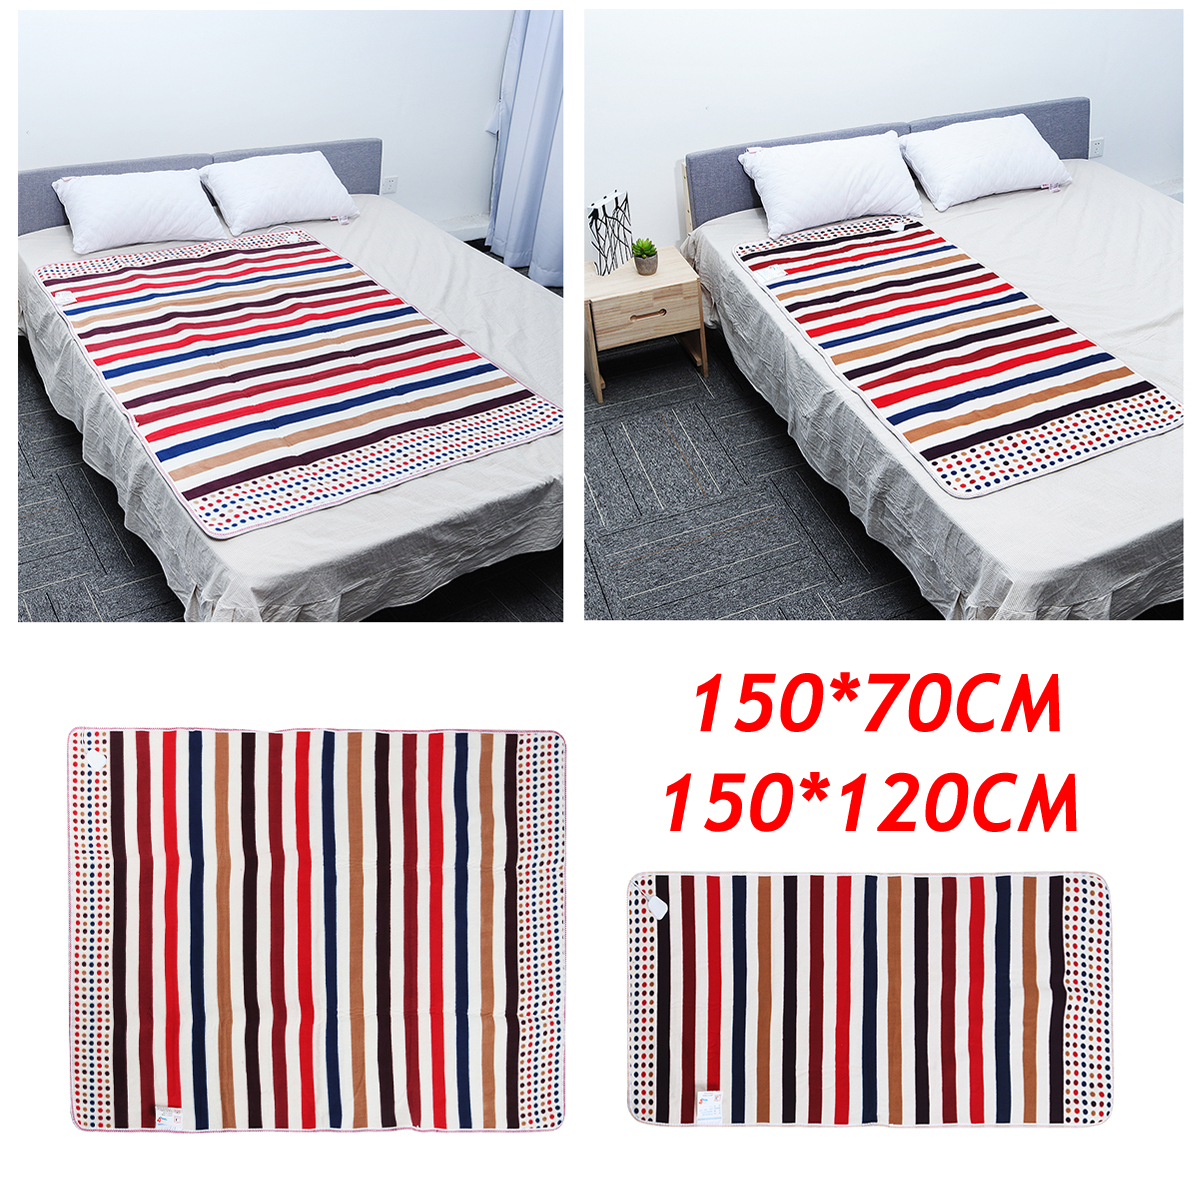 150x120cm70cm-Winter-Electric-Heated-Blanket-Winter-Warmer-Heater-with-Adjustable-Temperature-Contro-1612246-2